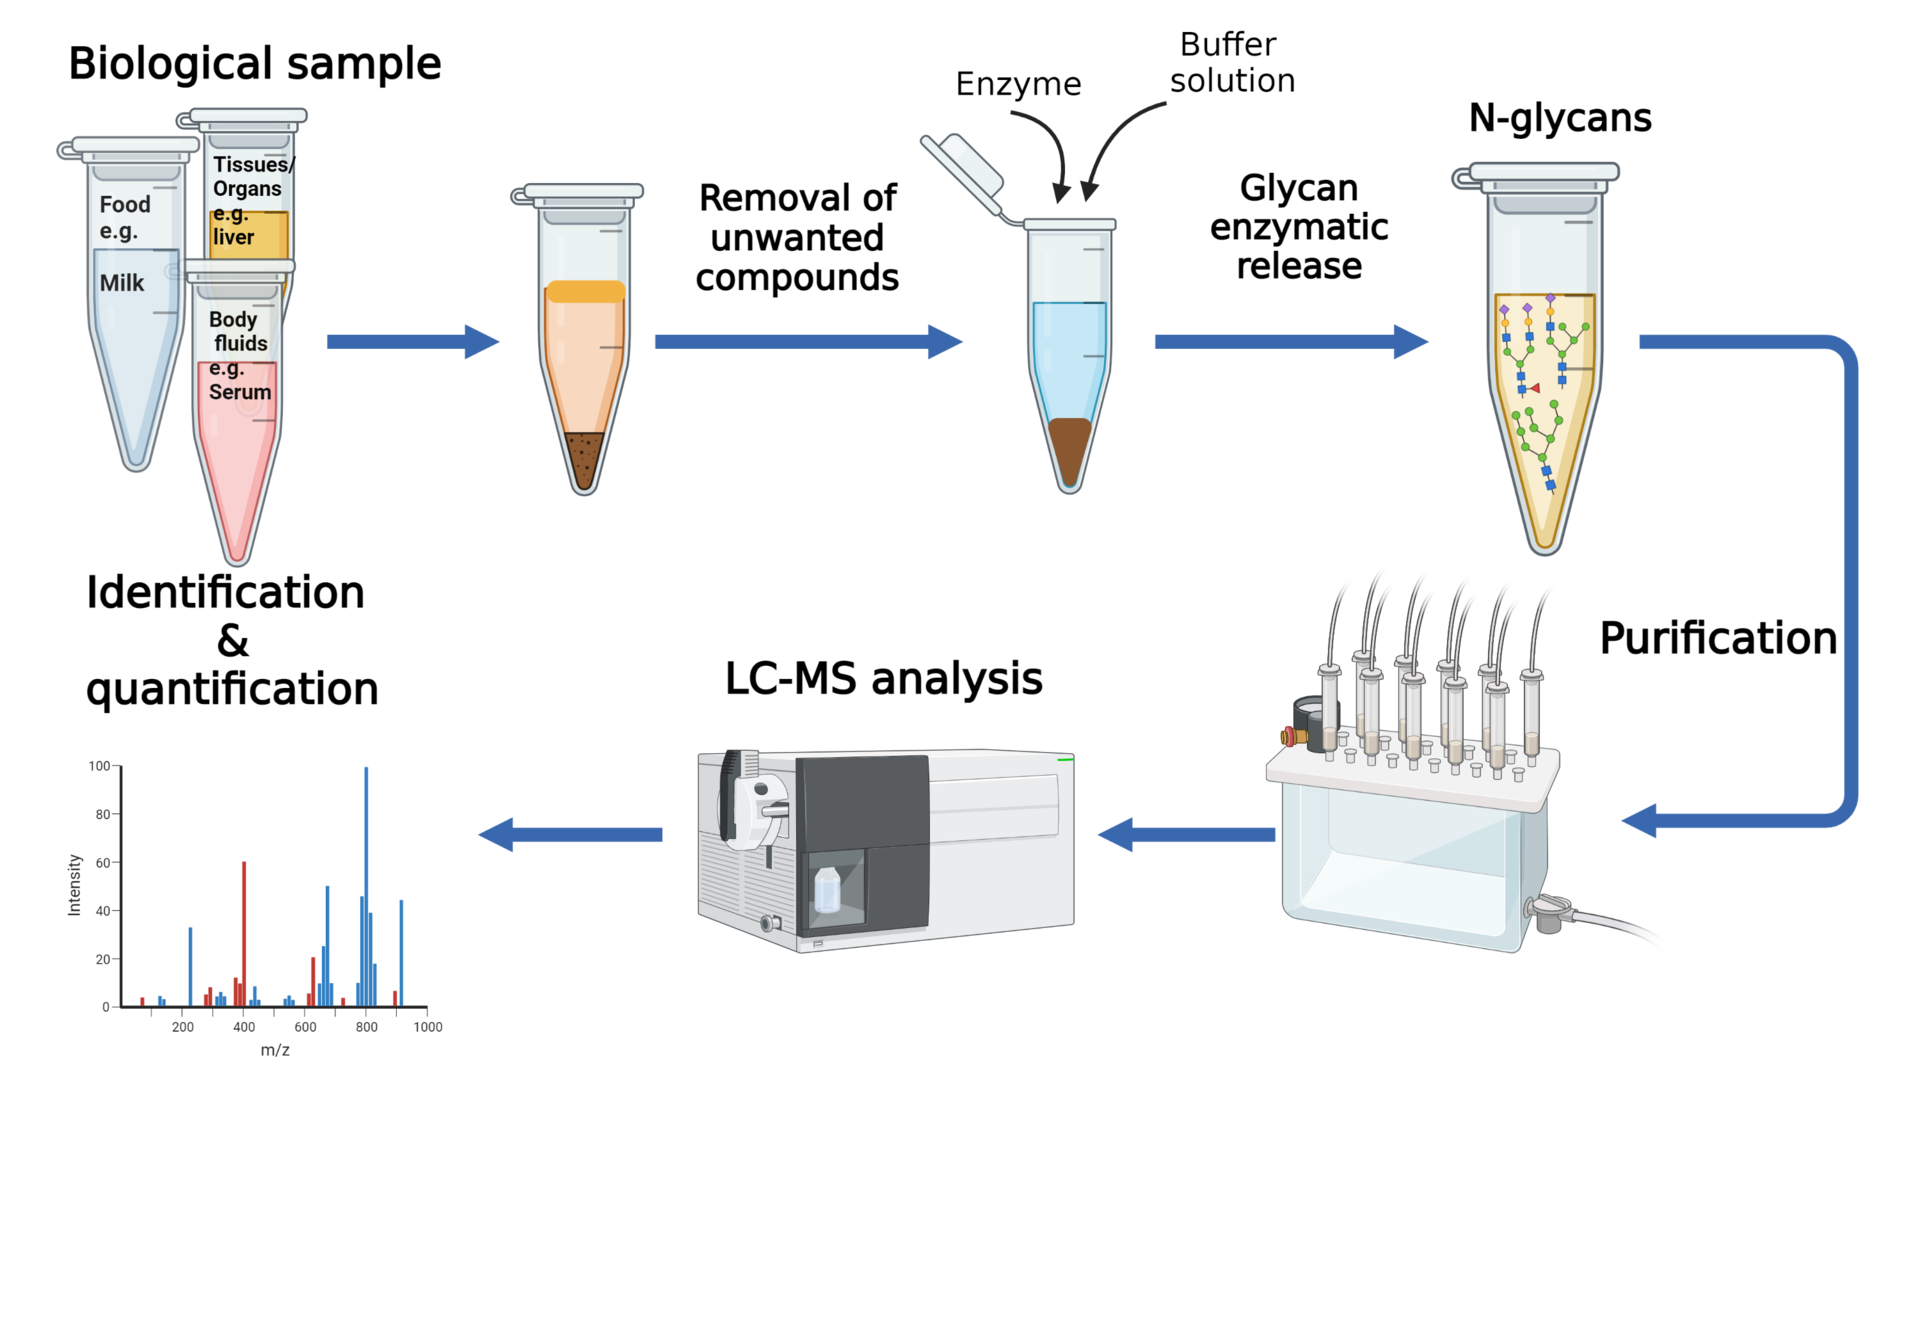 N-glycans analysis workflow at NFML